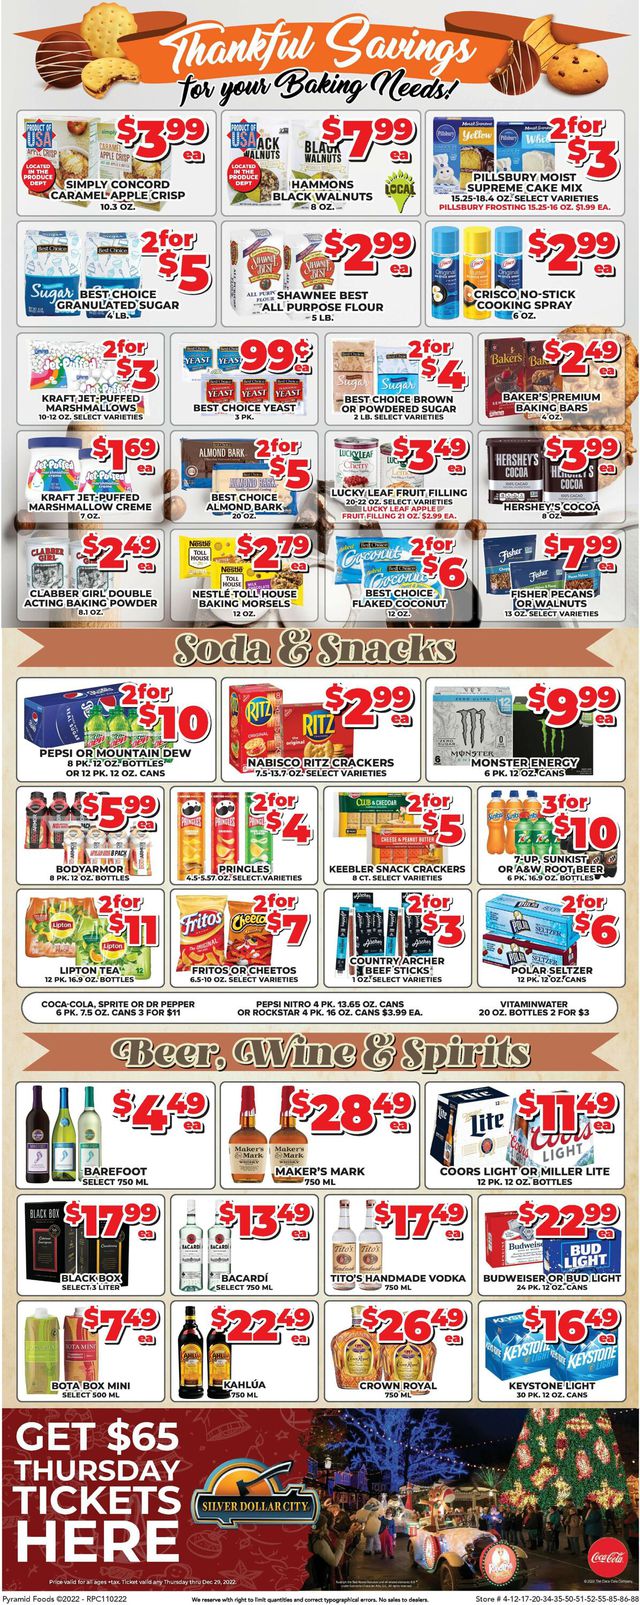 Price Cutter Ad from 11/02/2022